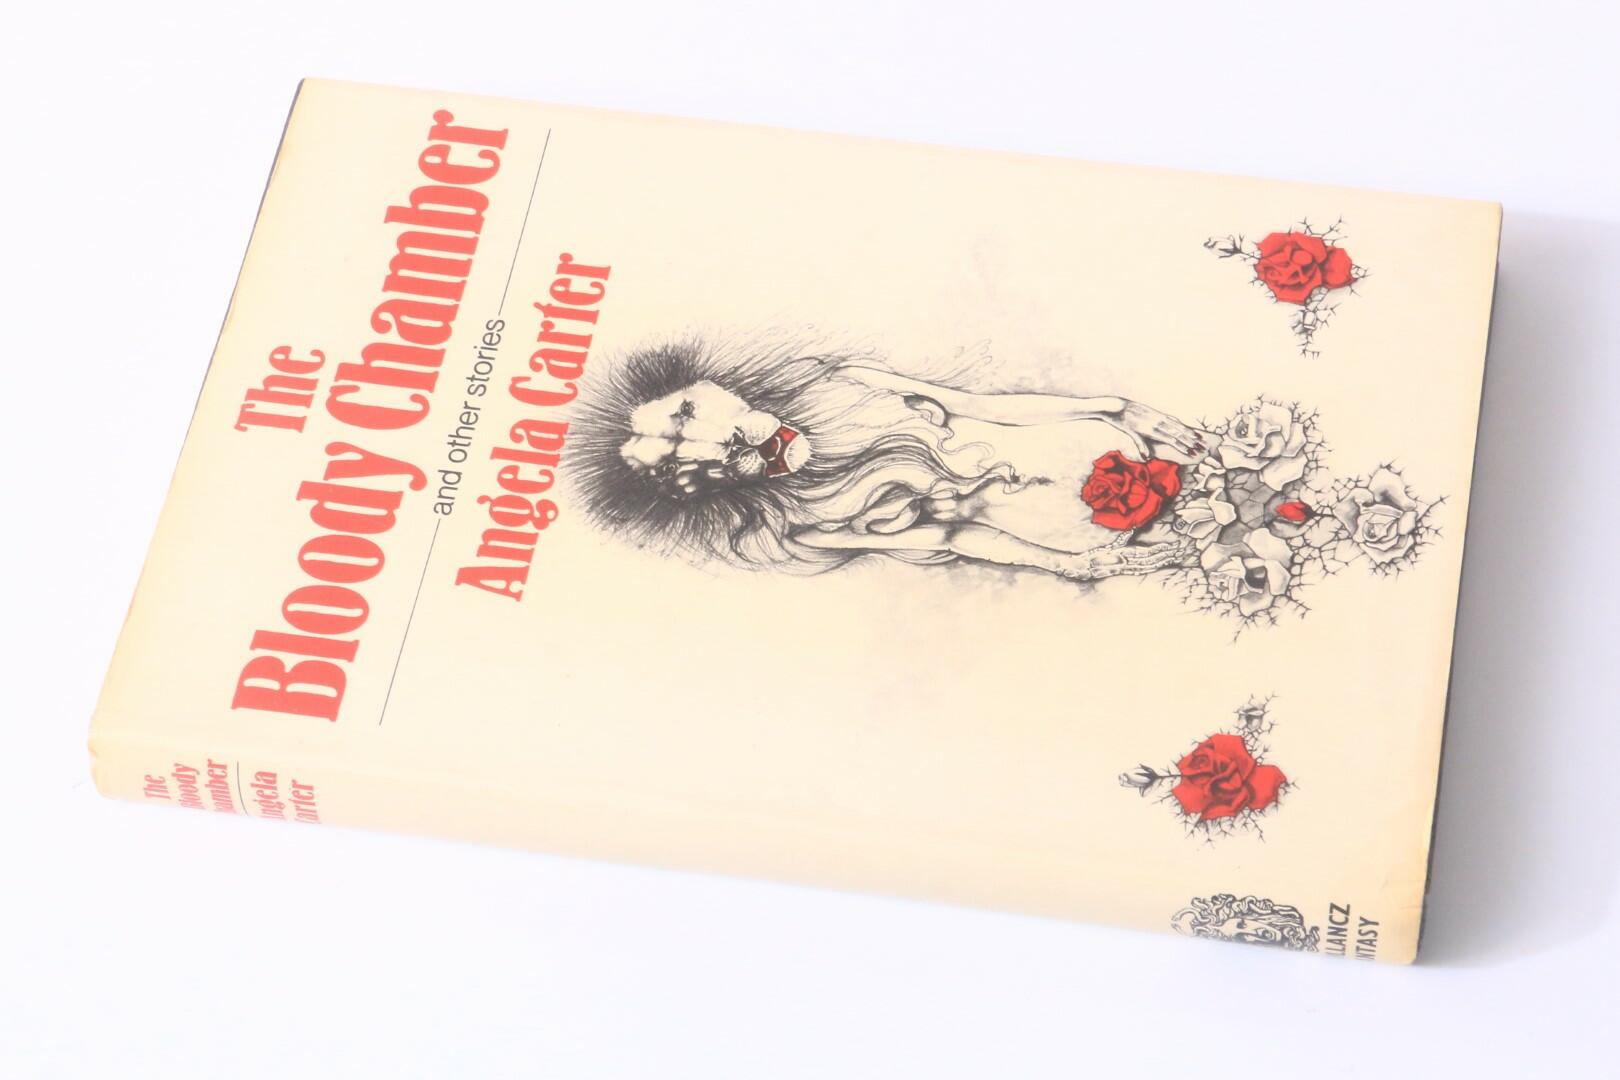 Angela Carter - The Bloody Chamber and Other Stories - Gollancz, 1979, First Edition.